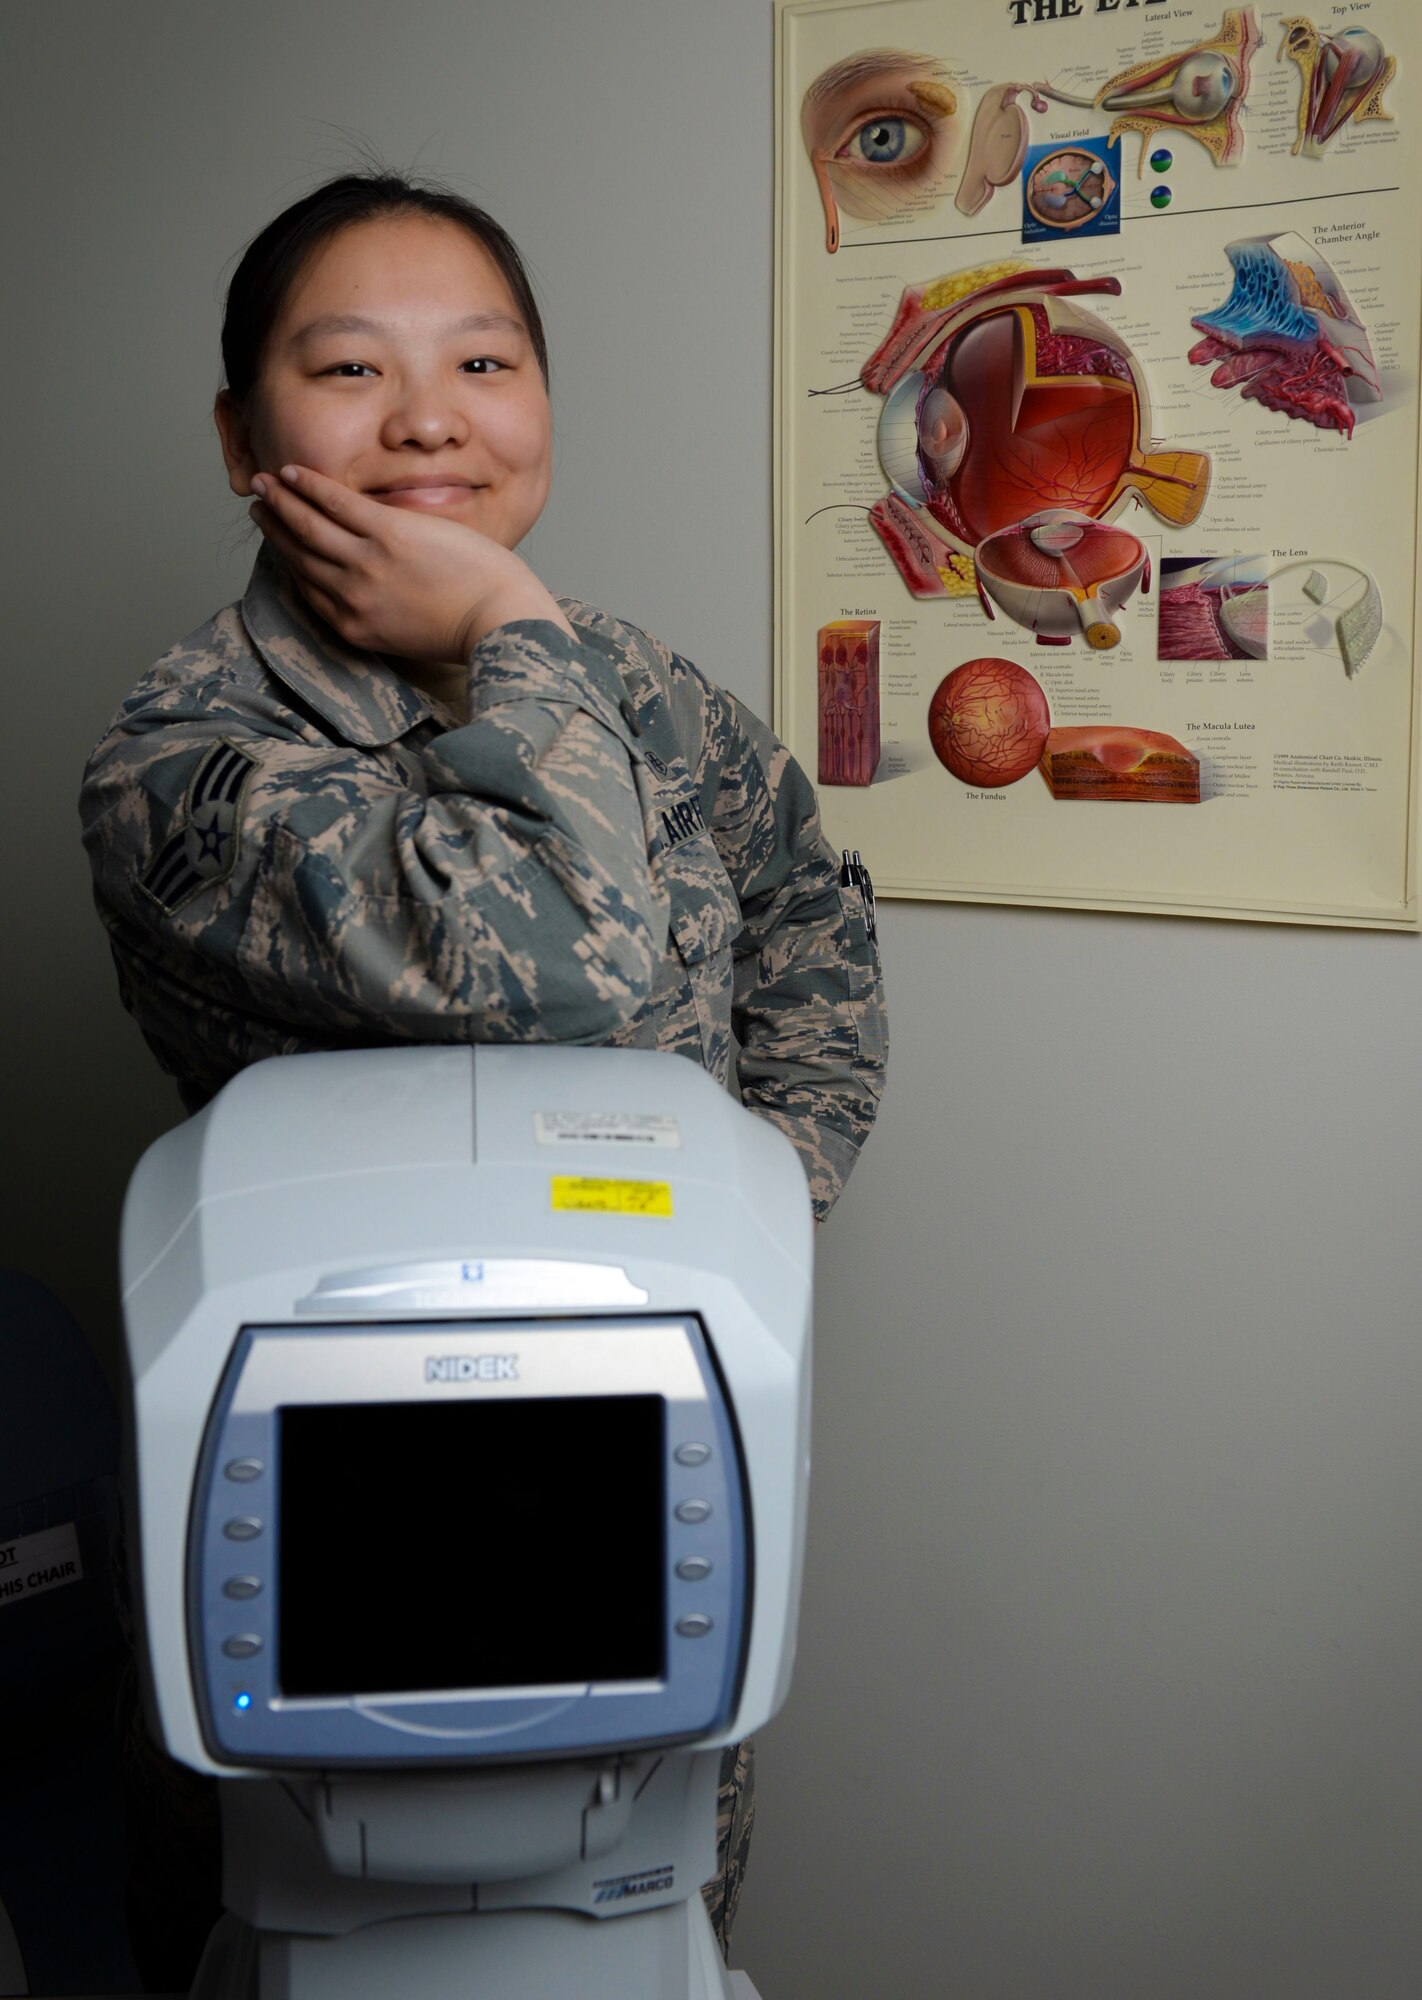 Senior Airman Lin Evenson, 99th Aerospace Medical Squadron ophthalmic technician, poses for a photo in her office on Nellis Air Force Base, Nevada. Evenson went from being a poor orphan in China to a successful Airman in the U.S. Air Force. (U.S. Air Force photo by Airman 1st Class Andrew D. Sarver)